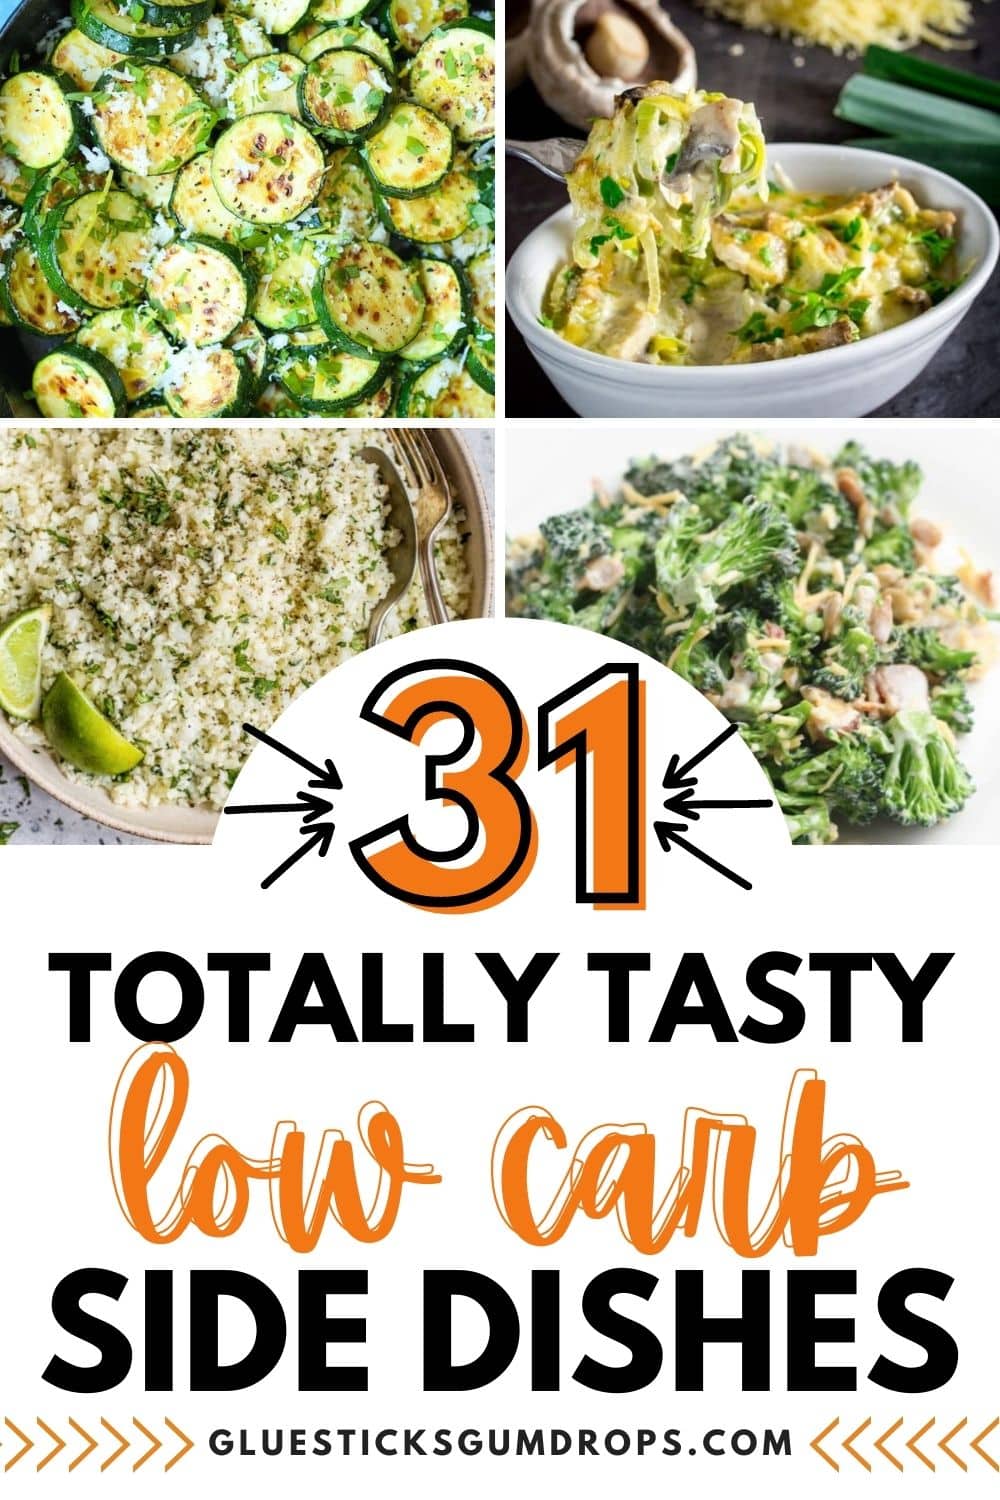 30 Best Low Carb Side Dishes Easy Recipes For Low Carb Sidesdelish ...